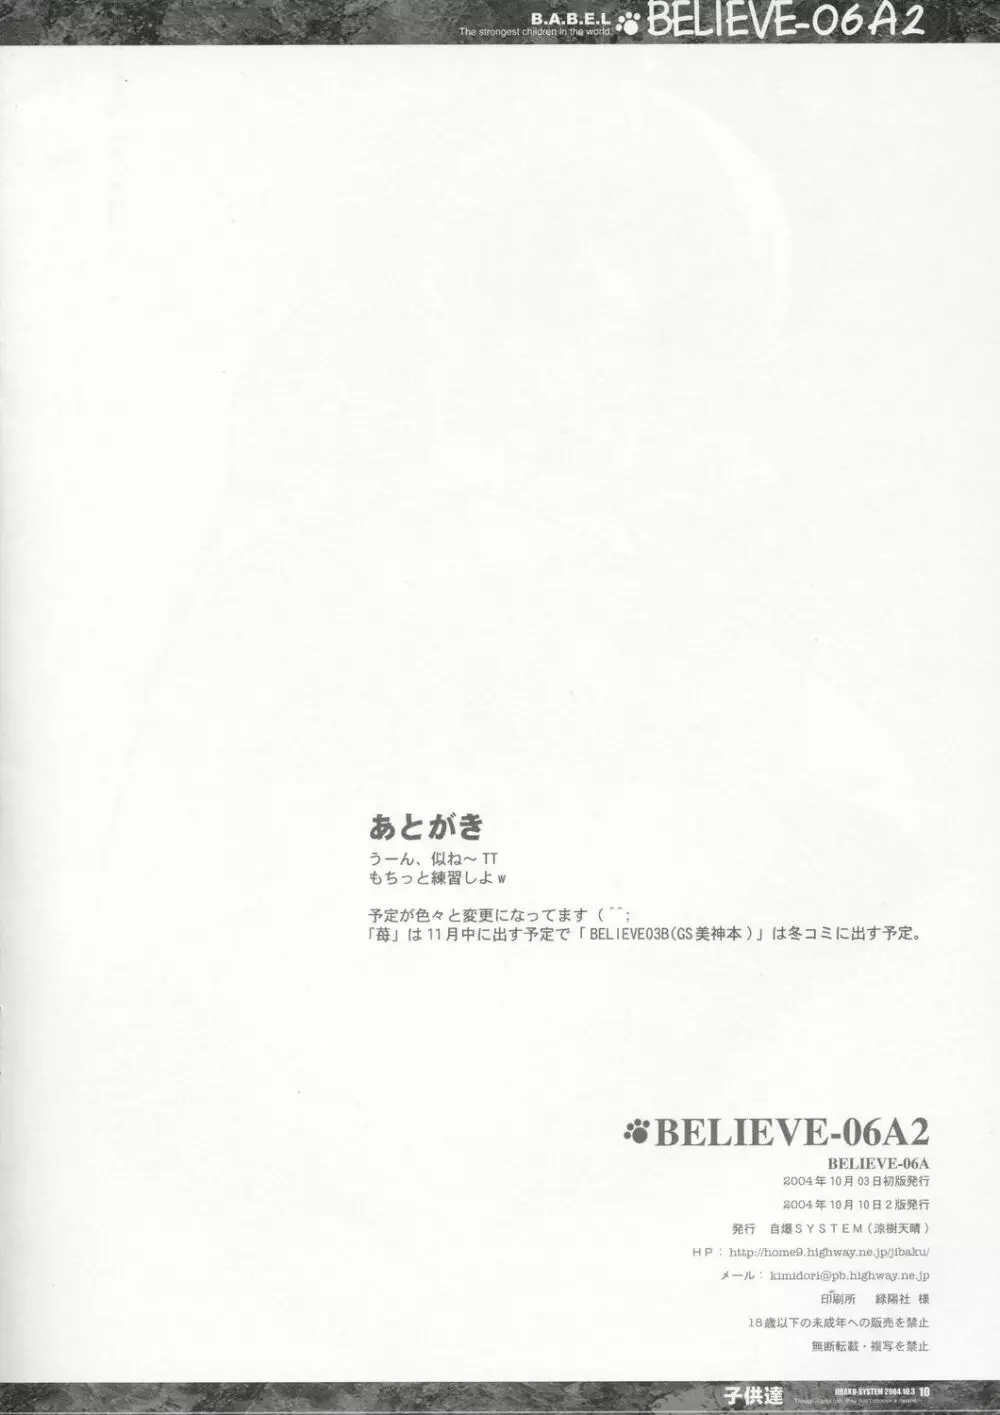 BELIEVE-06A2 10ページ